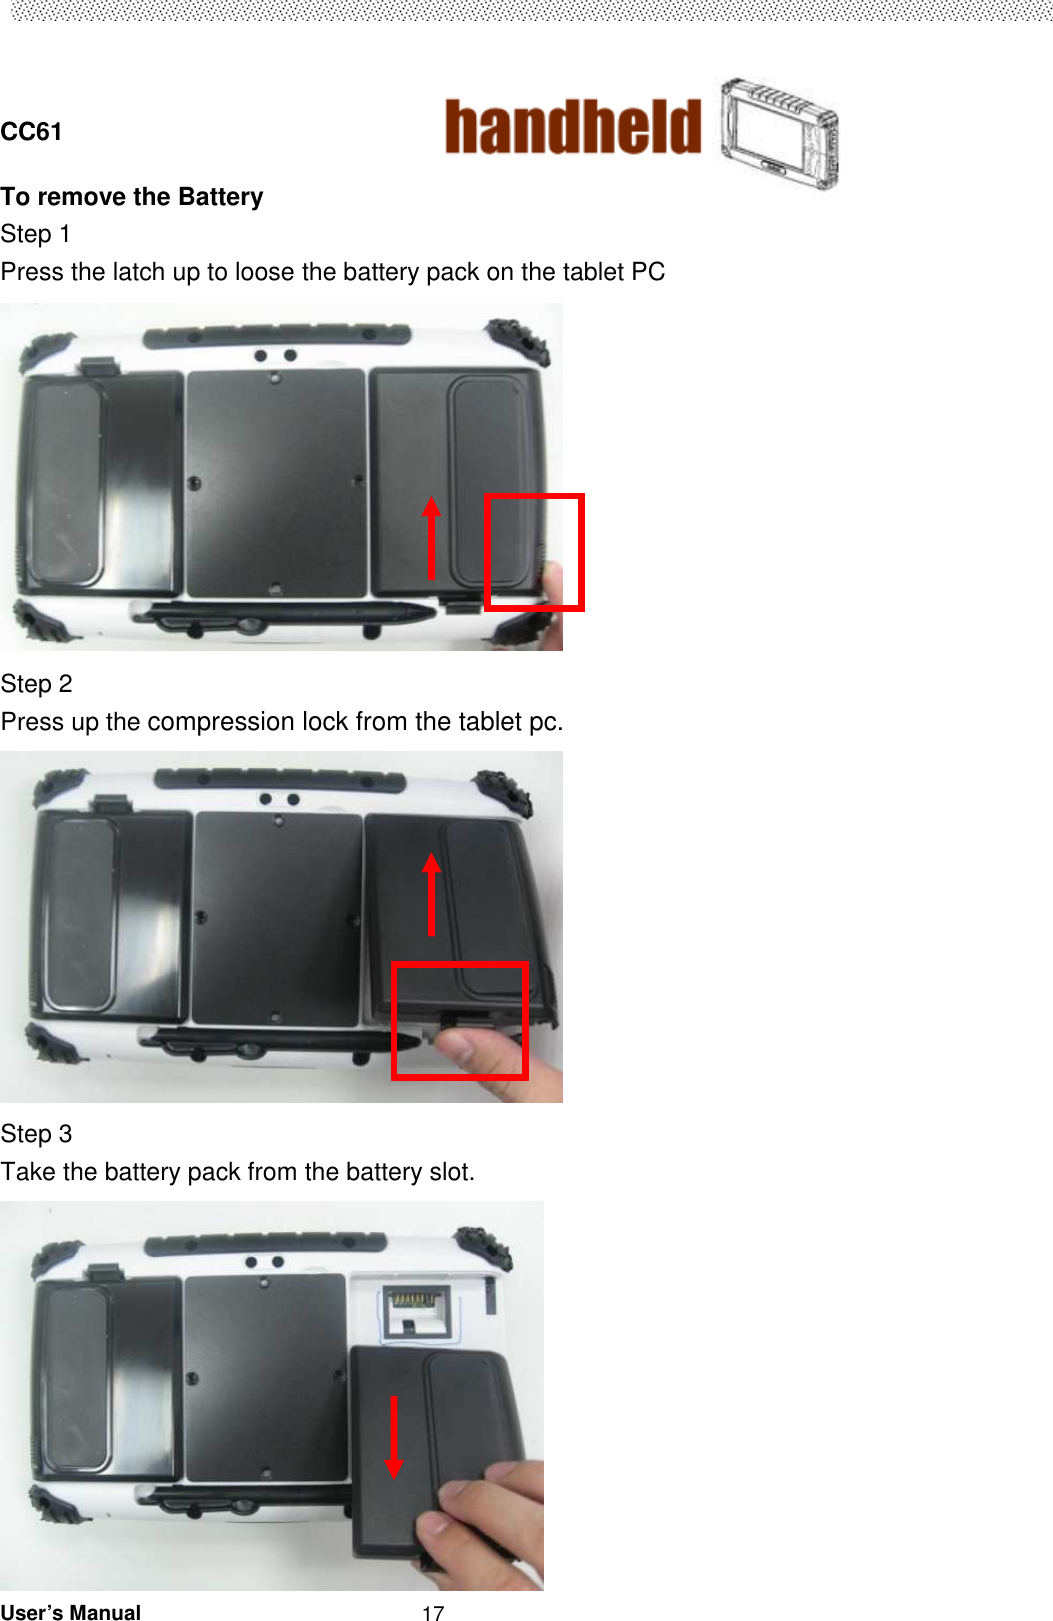  CC61                                       User’s Manual                                                   17To remove the Battery Step 1 Press the latch up to loose the battery pack on the tablet PC  Step 2   Press up the compression lock from the tablet pc.   Step 3   Take the battery pack from the battery slot.  